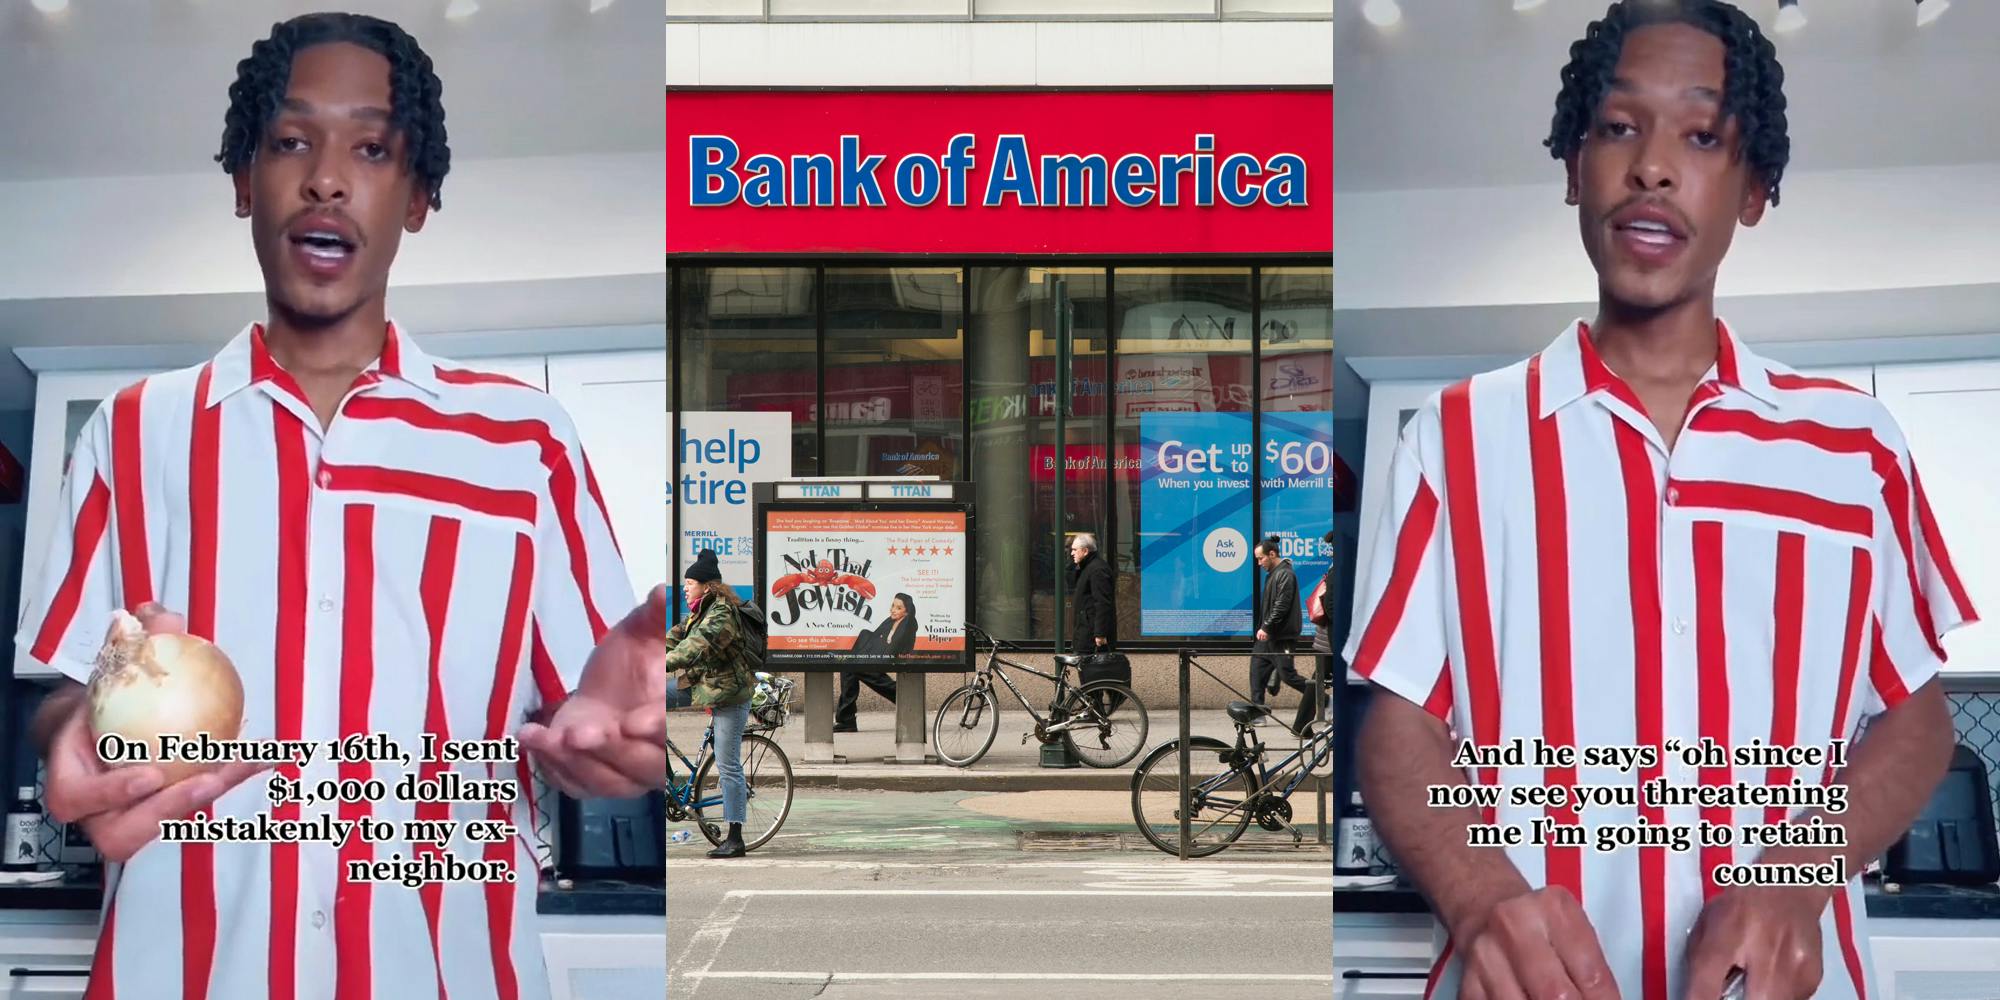 person speaking holding onion with caption "On February 16th, I sent $1,000 dollars mistakenly to my ex-neighbor." (l) Bank Of America sign on building in city (c) person speaking cutting onion with caption "And he says "oh since I now see you're threatening me I'm going to retain counsel" (r)